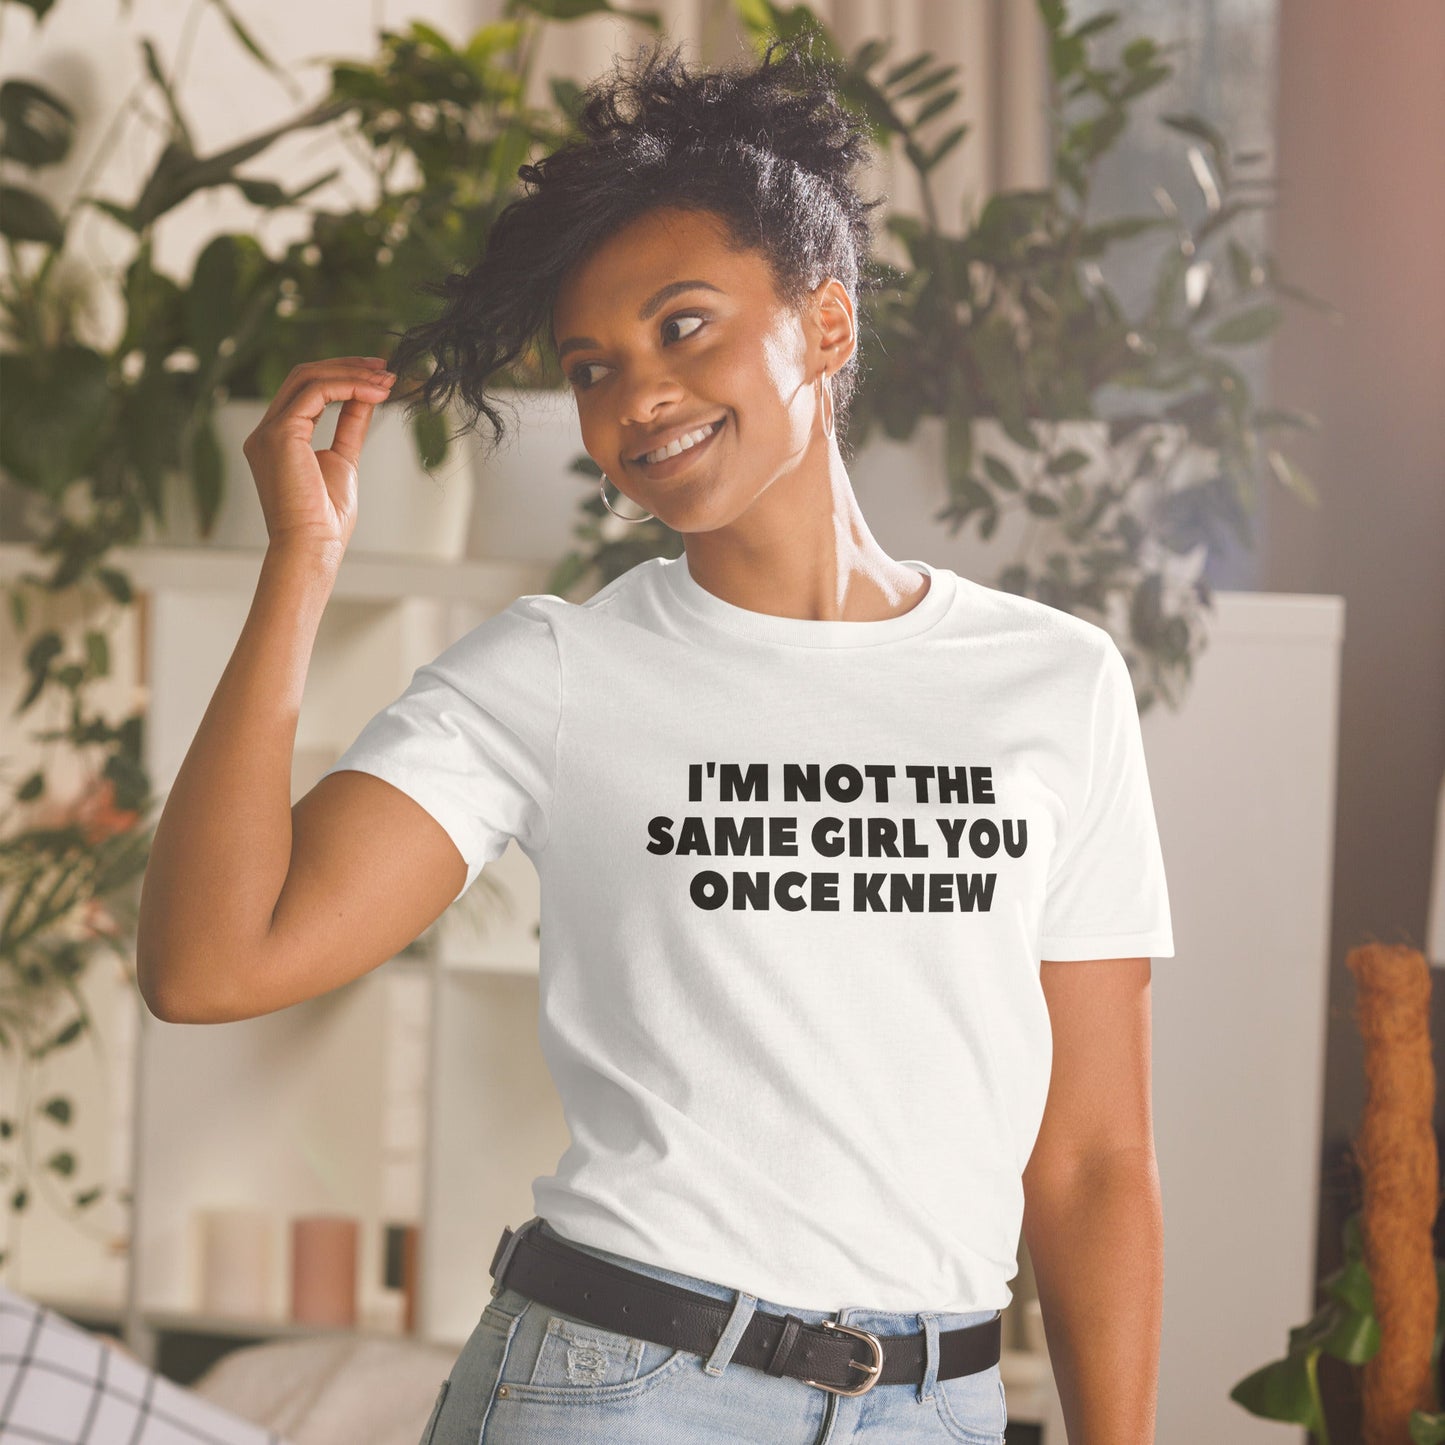 I'm Not The Same Girl You Once Knew Short-Sleeve Unisex T-Shirt (For a Slim Fit Order a Size Down) - Catch This Tea Shirts